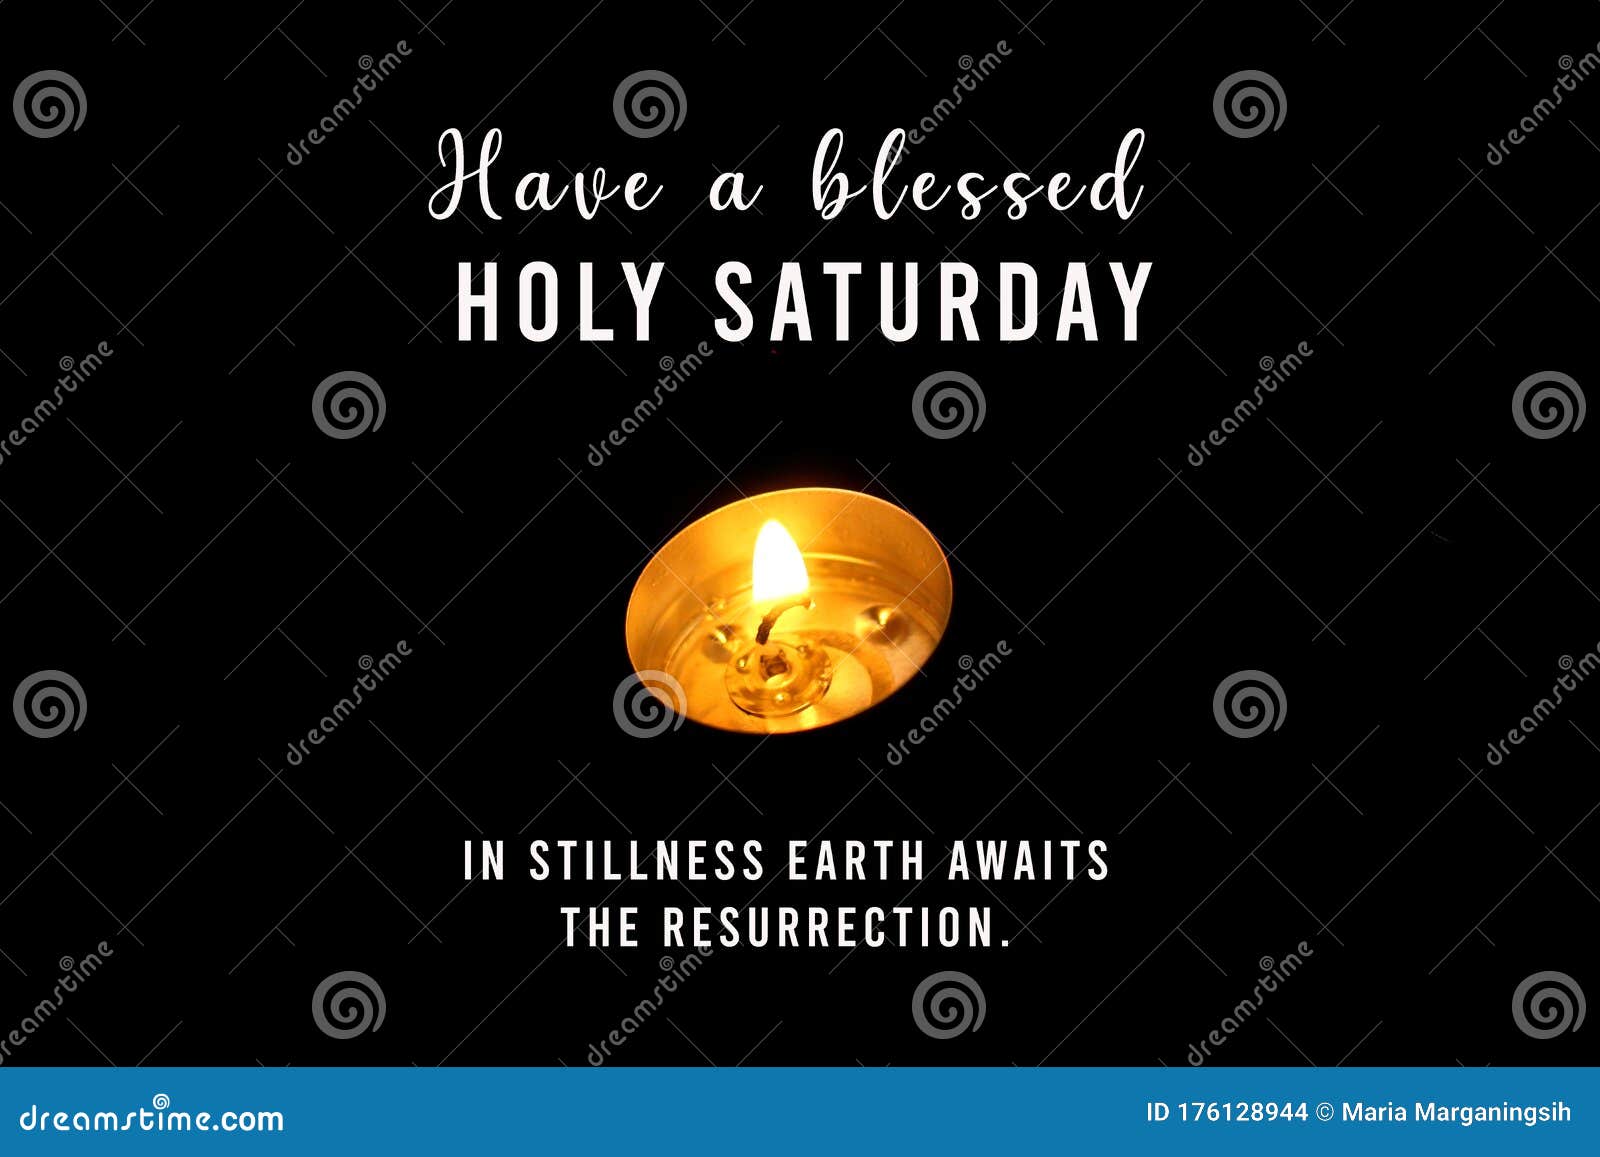 have a blessed holy saturday concept with christian inspirational quote - in stillness earth awaits the resurrection.